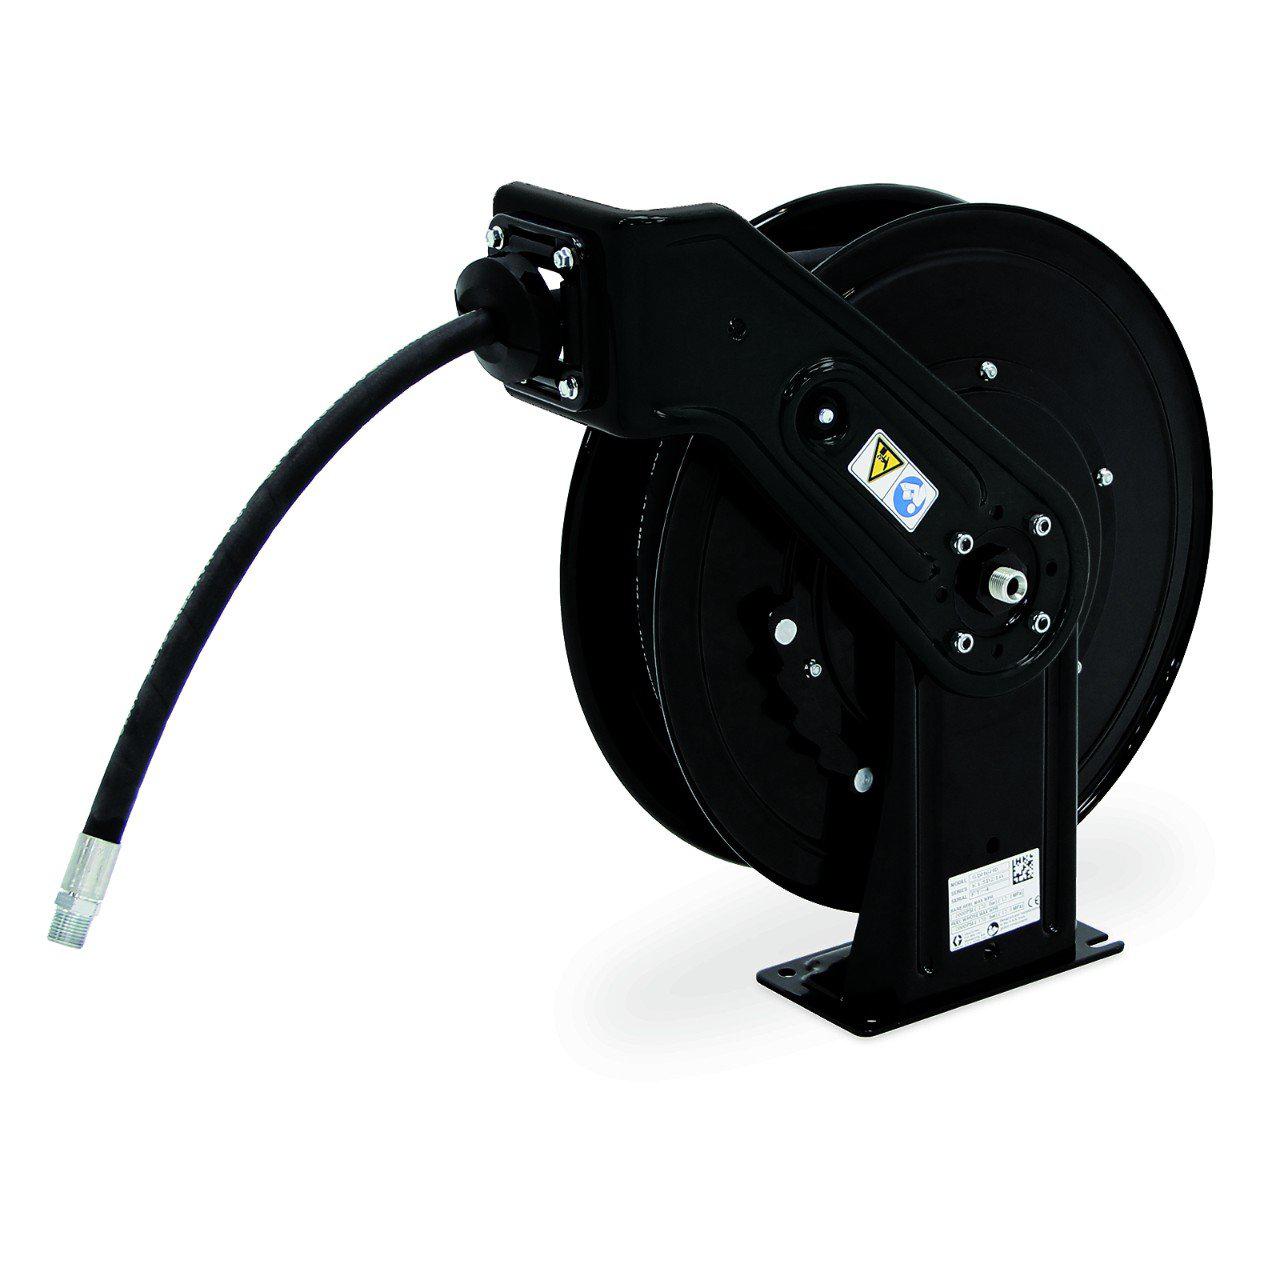 Graco SDL25D - SDX10, 3/8 x 50' Air/Water Hose Reel Overhead Mount, Black by FastoolNow